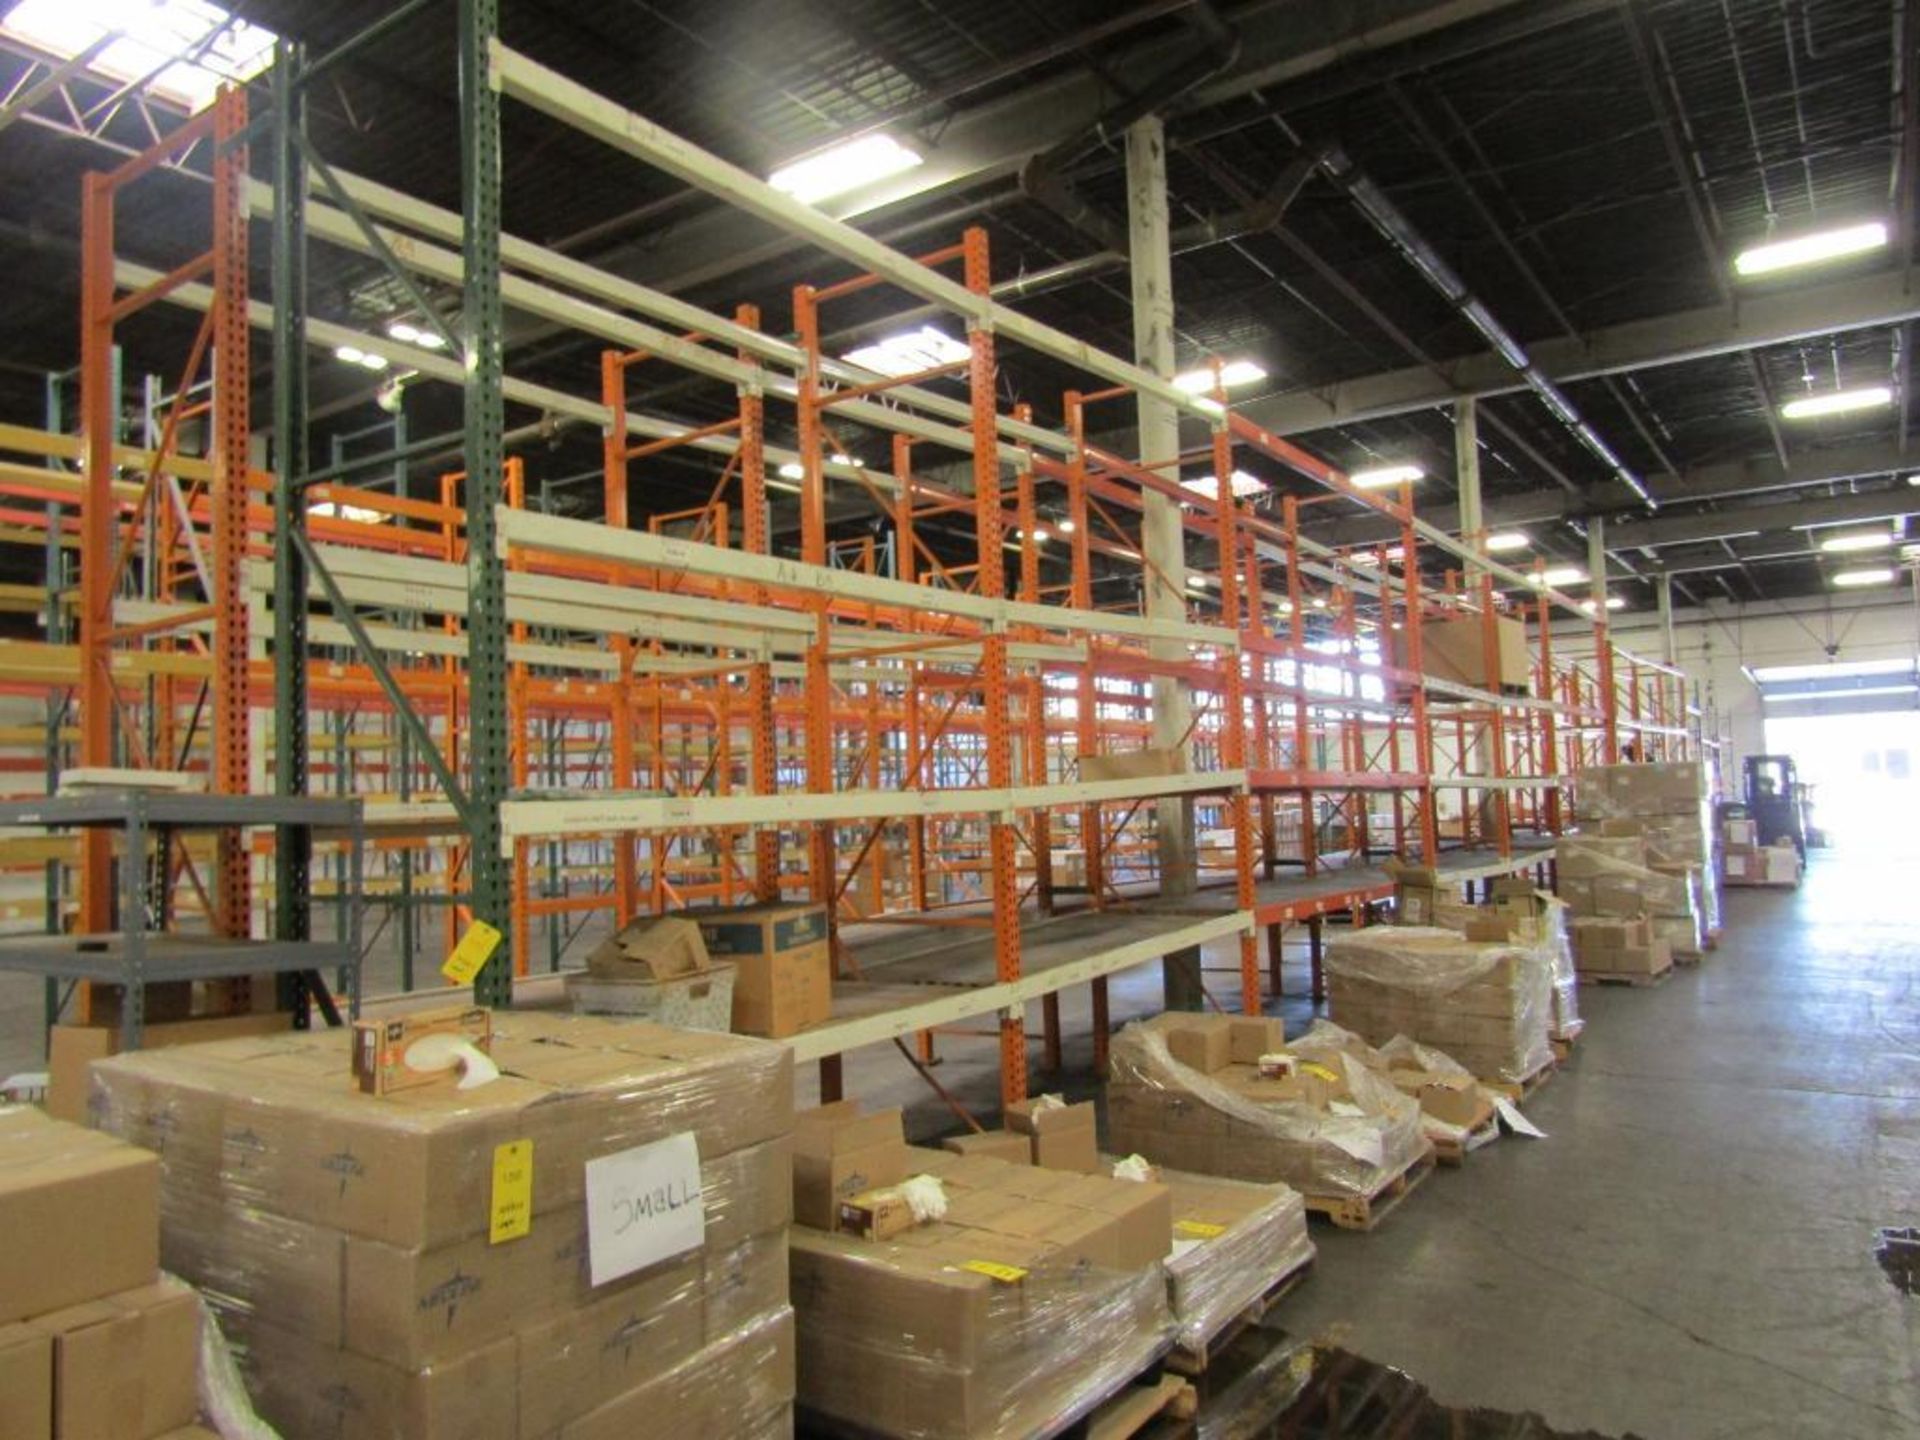 LOT: (10) Pallet Rack Sections (4) 14ft. x 8ft. X 36in., (2) 14ft. x 12ft. x 36in., (4) 12ft. x 8ft.